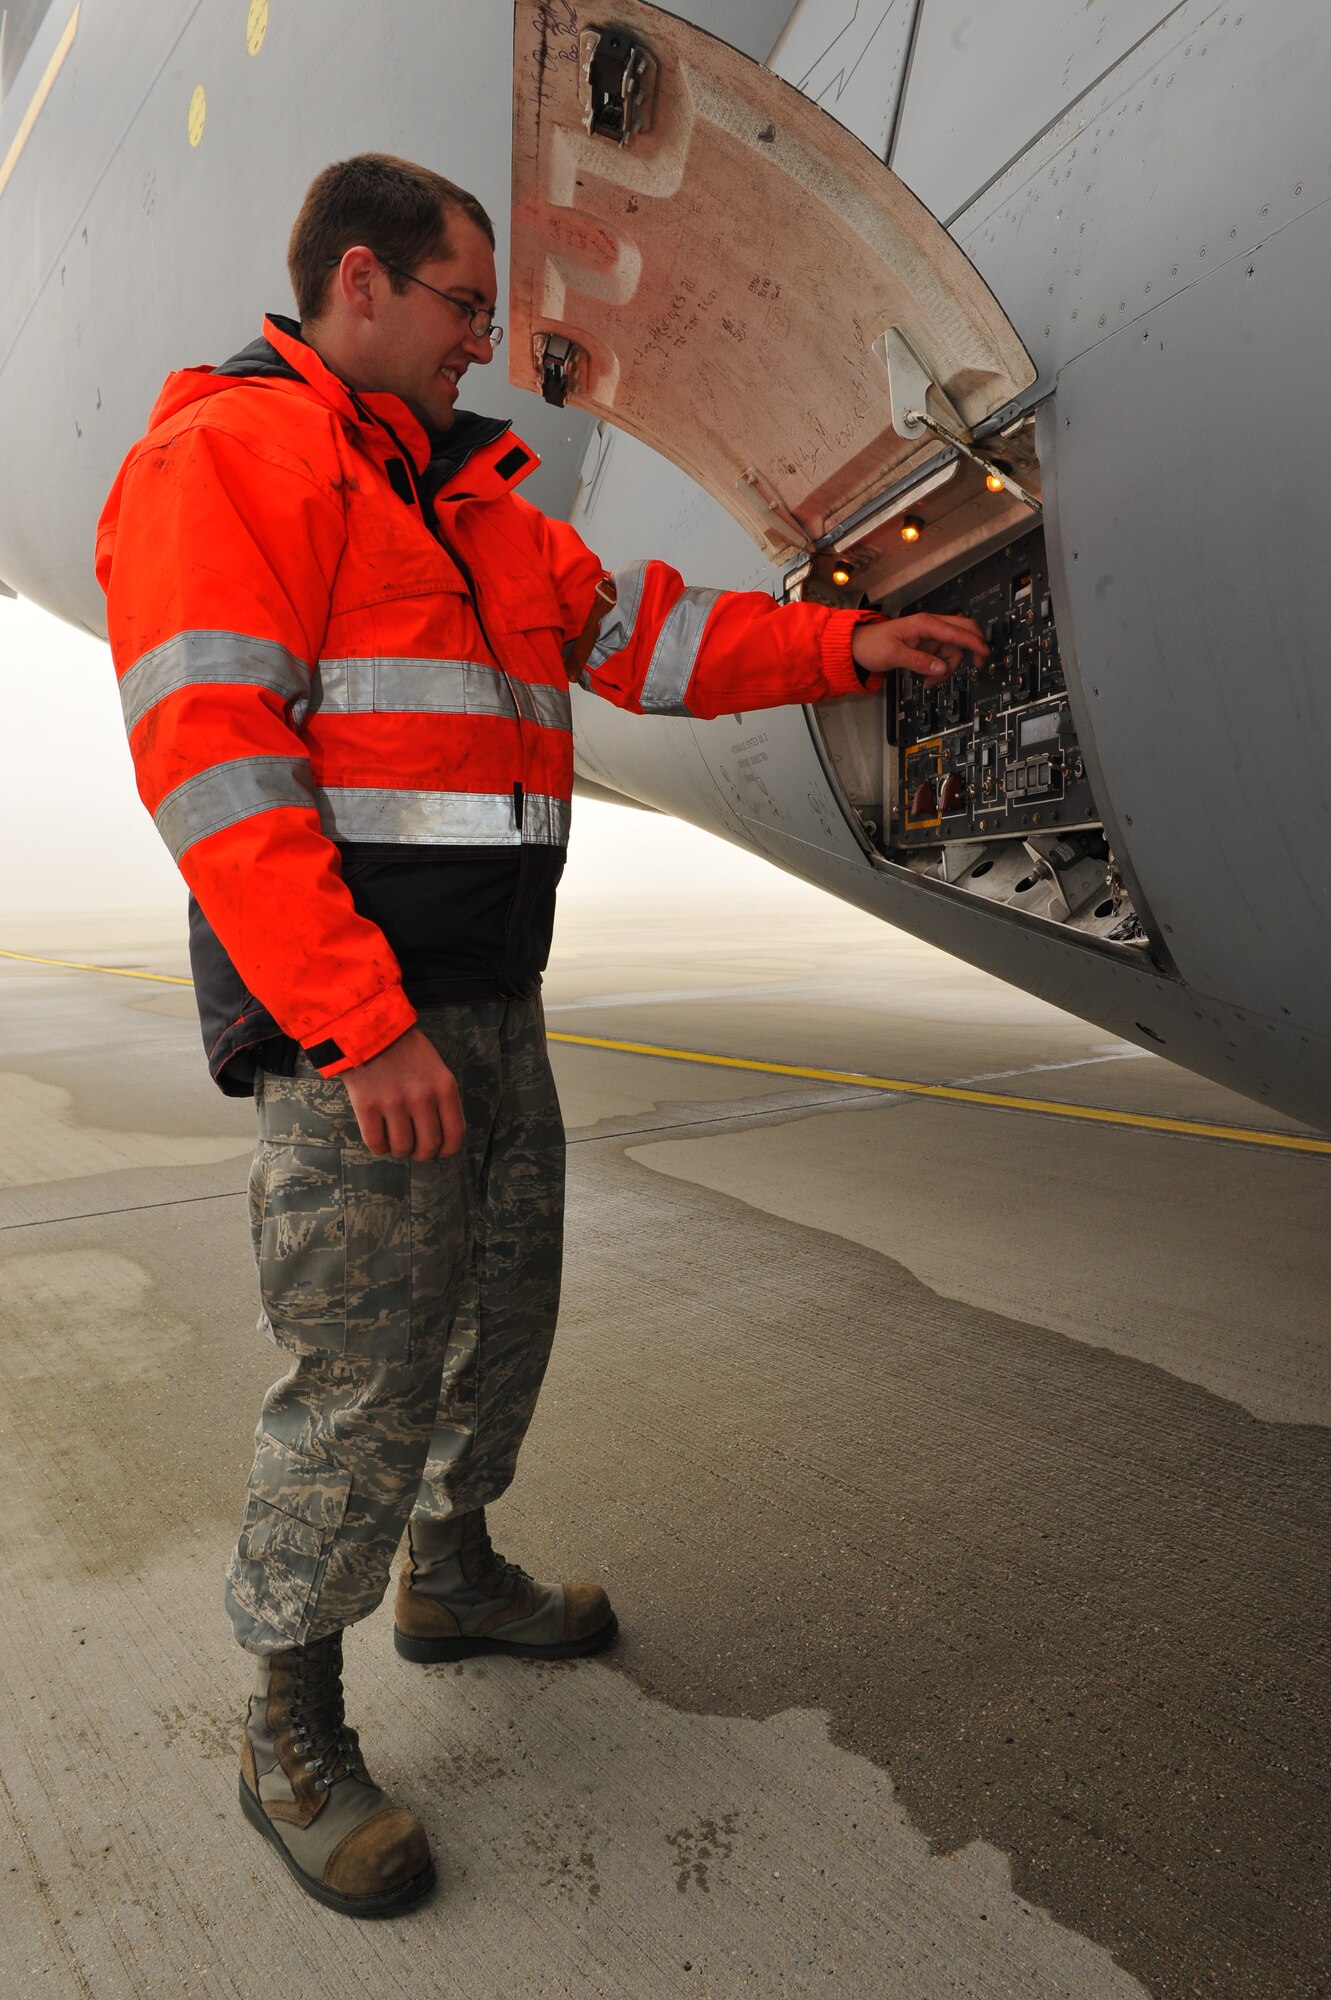 SPANGDAHLEM AIR BASE, Germany – Staff Sgt. Randle Johnson, 726th Air Mobility Squadron communication and navigation craftsman, checks the functionality of a refueling control board during a pre-flight inspection here Nov. 9. The 726th AMS is a strategic transit hub in Europe and provides support for heavy cargo aircraft and aircrews throughout the world. (U.S. Air Force photo/Airman 1st Class Dillon Davis)